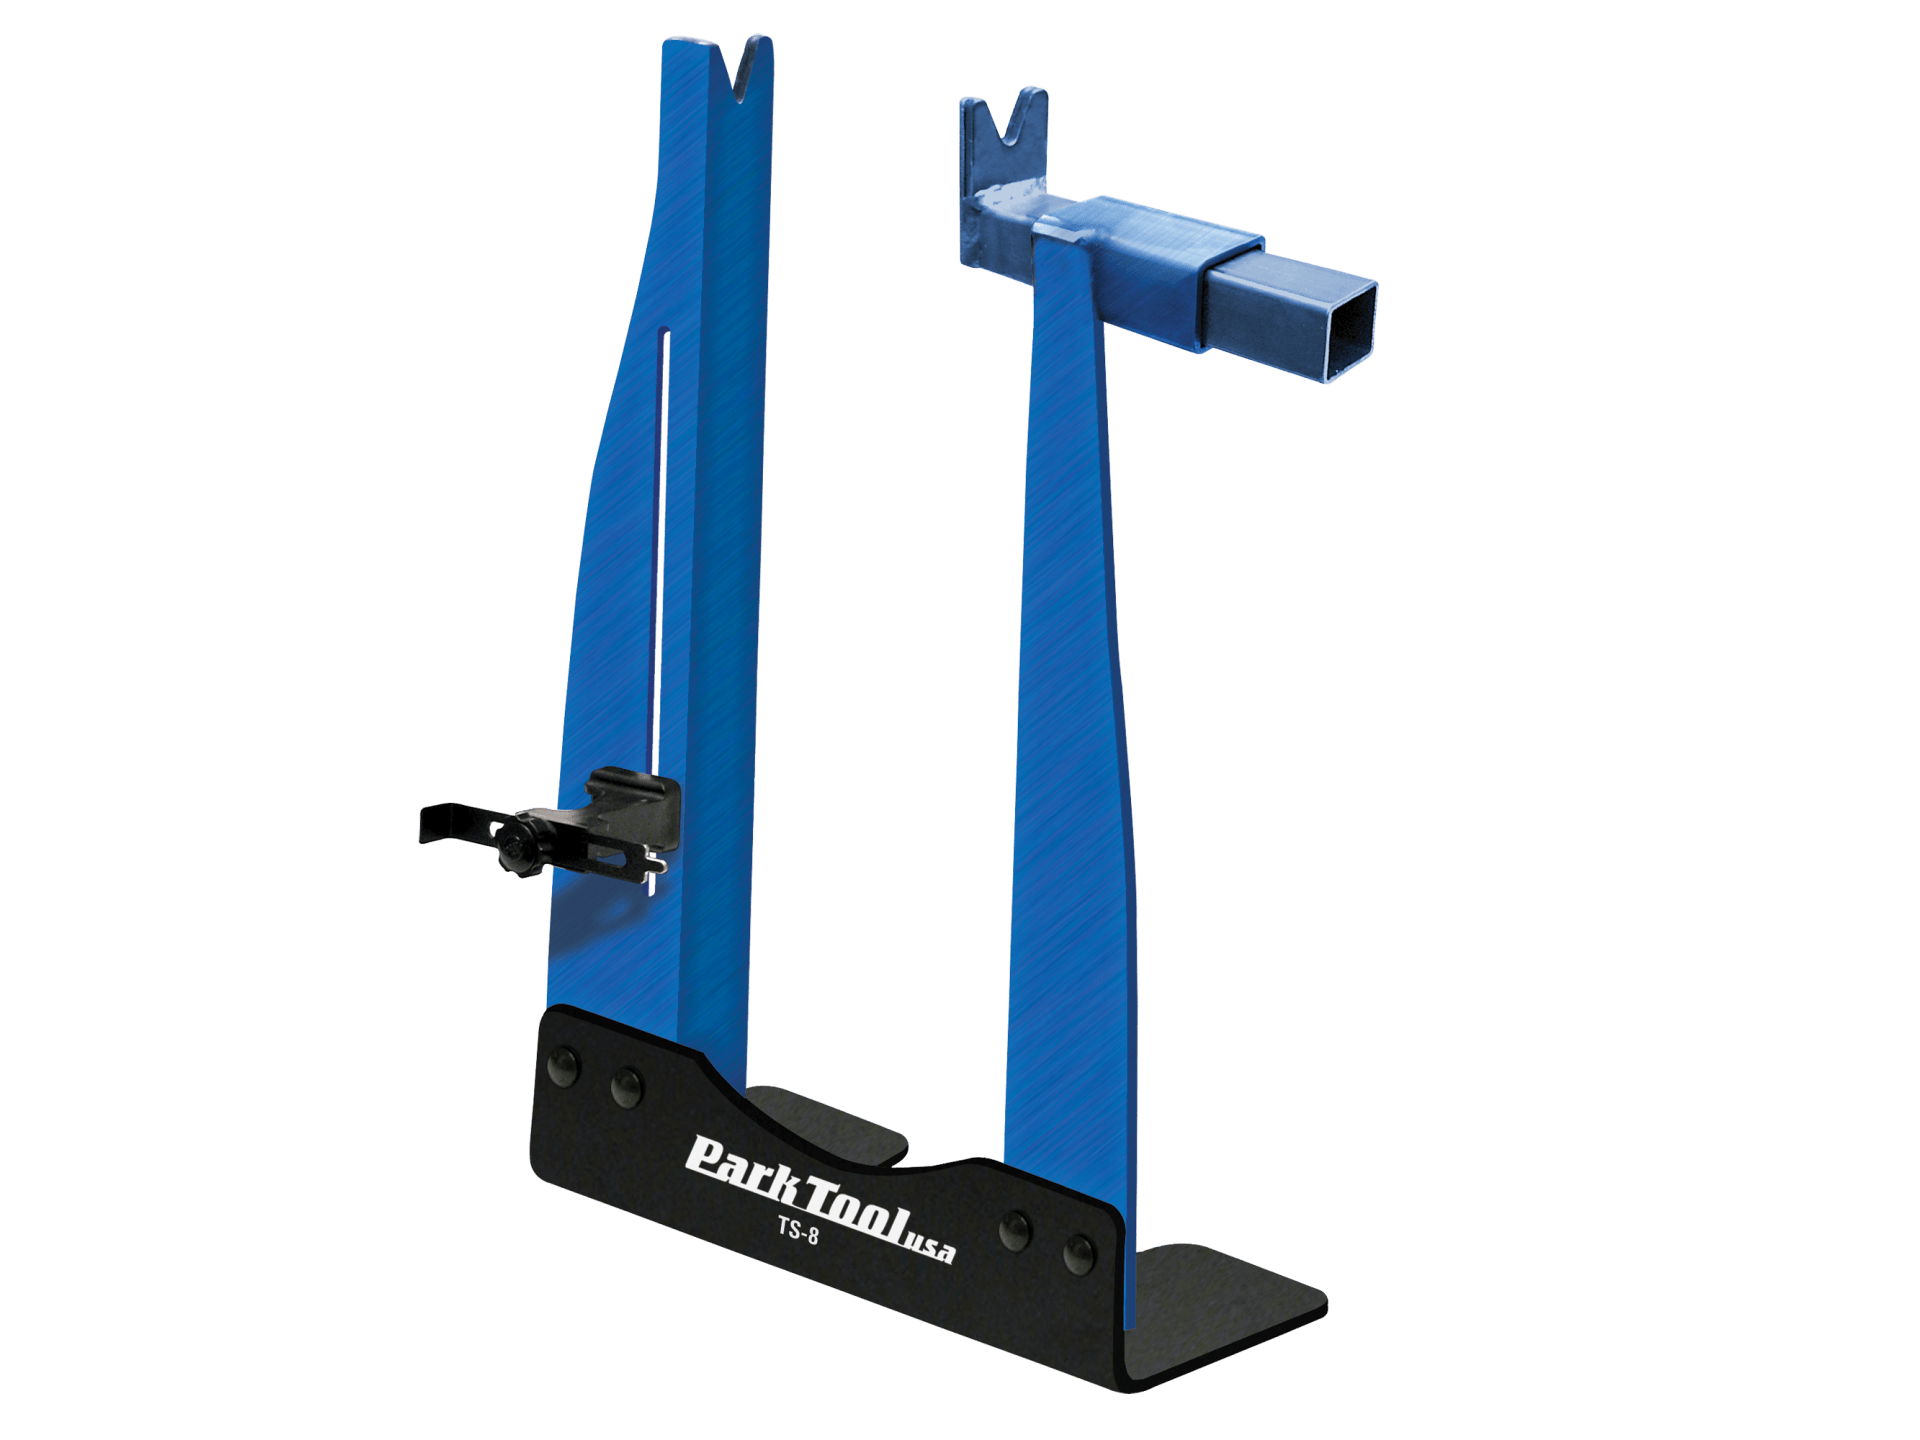 Park Tool TS-8 Home Wheel Truing Stand